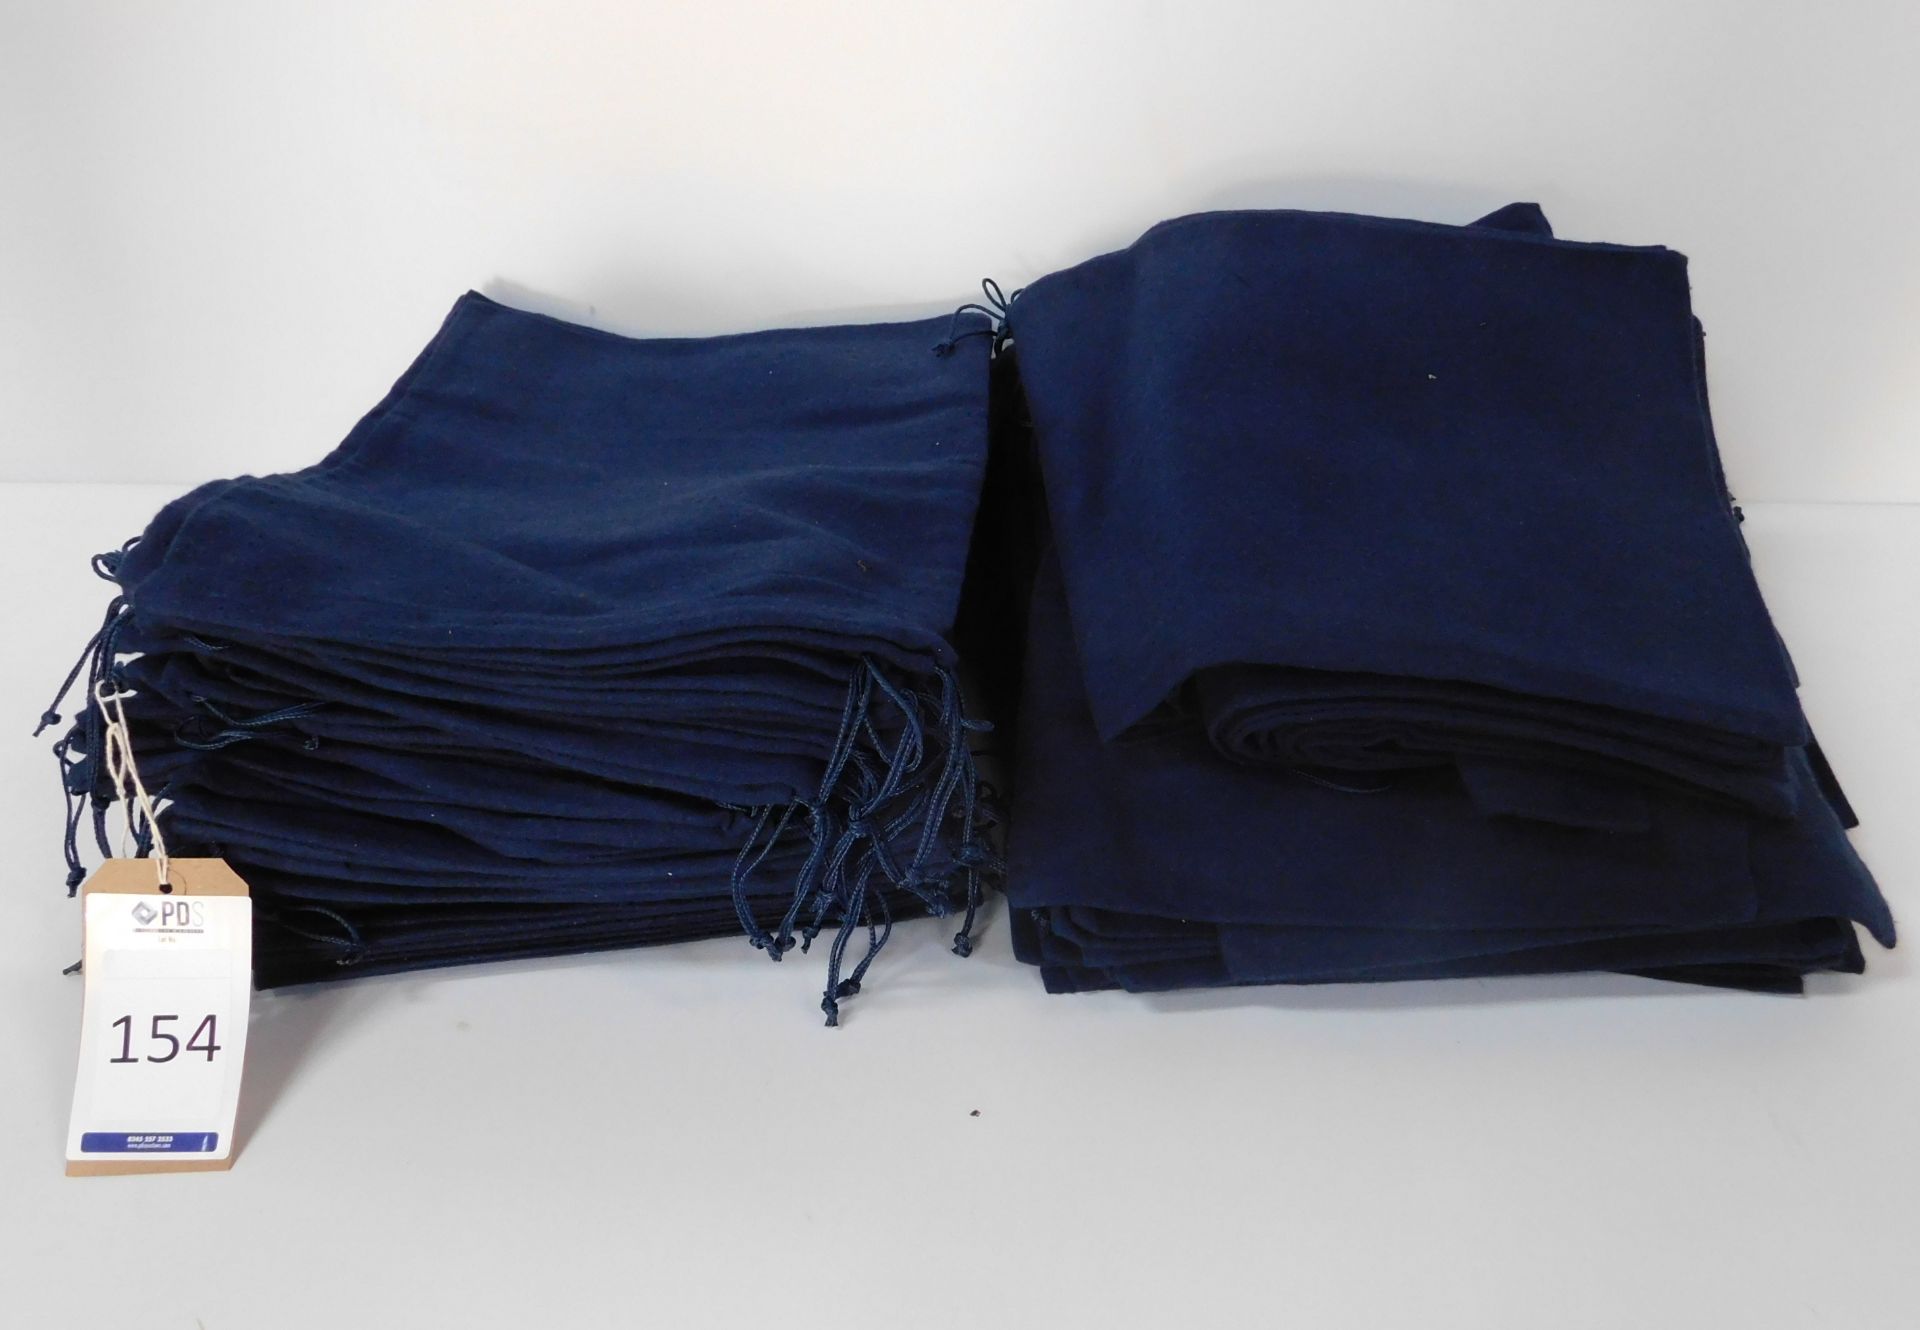 98 Unbranded Navy Boot Bags (Location: Brentwood - See General Notes for Details)